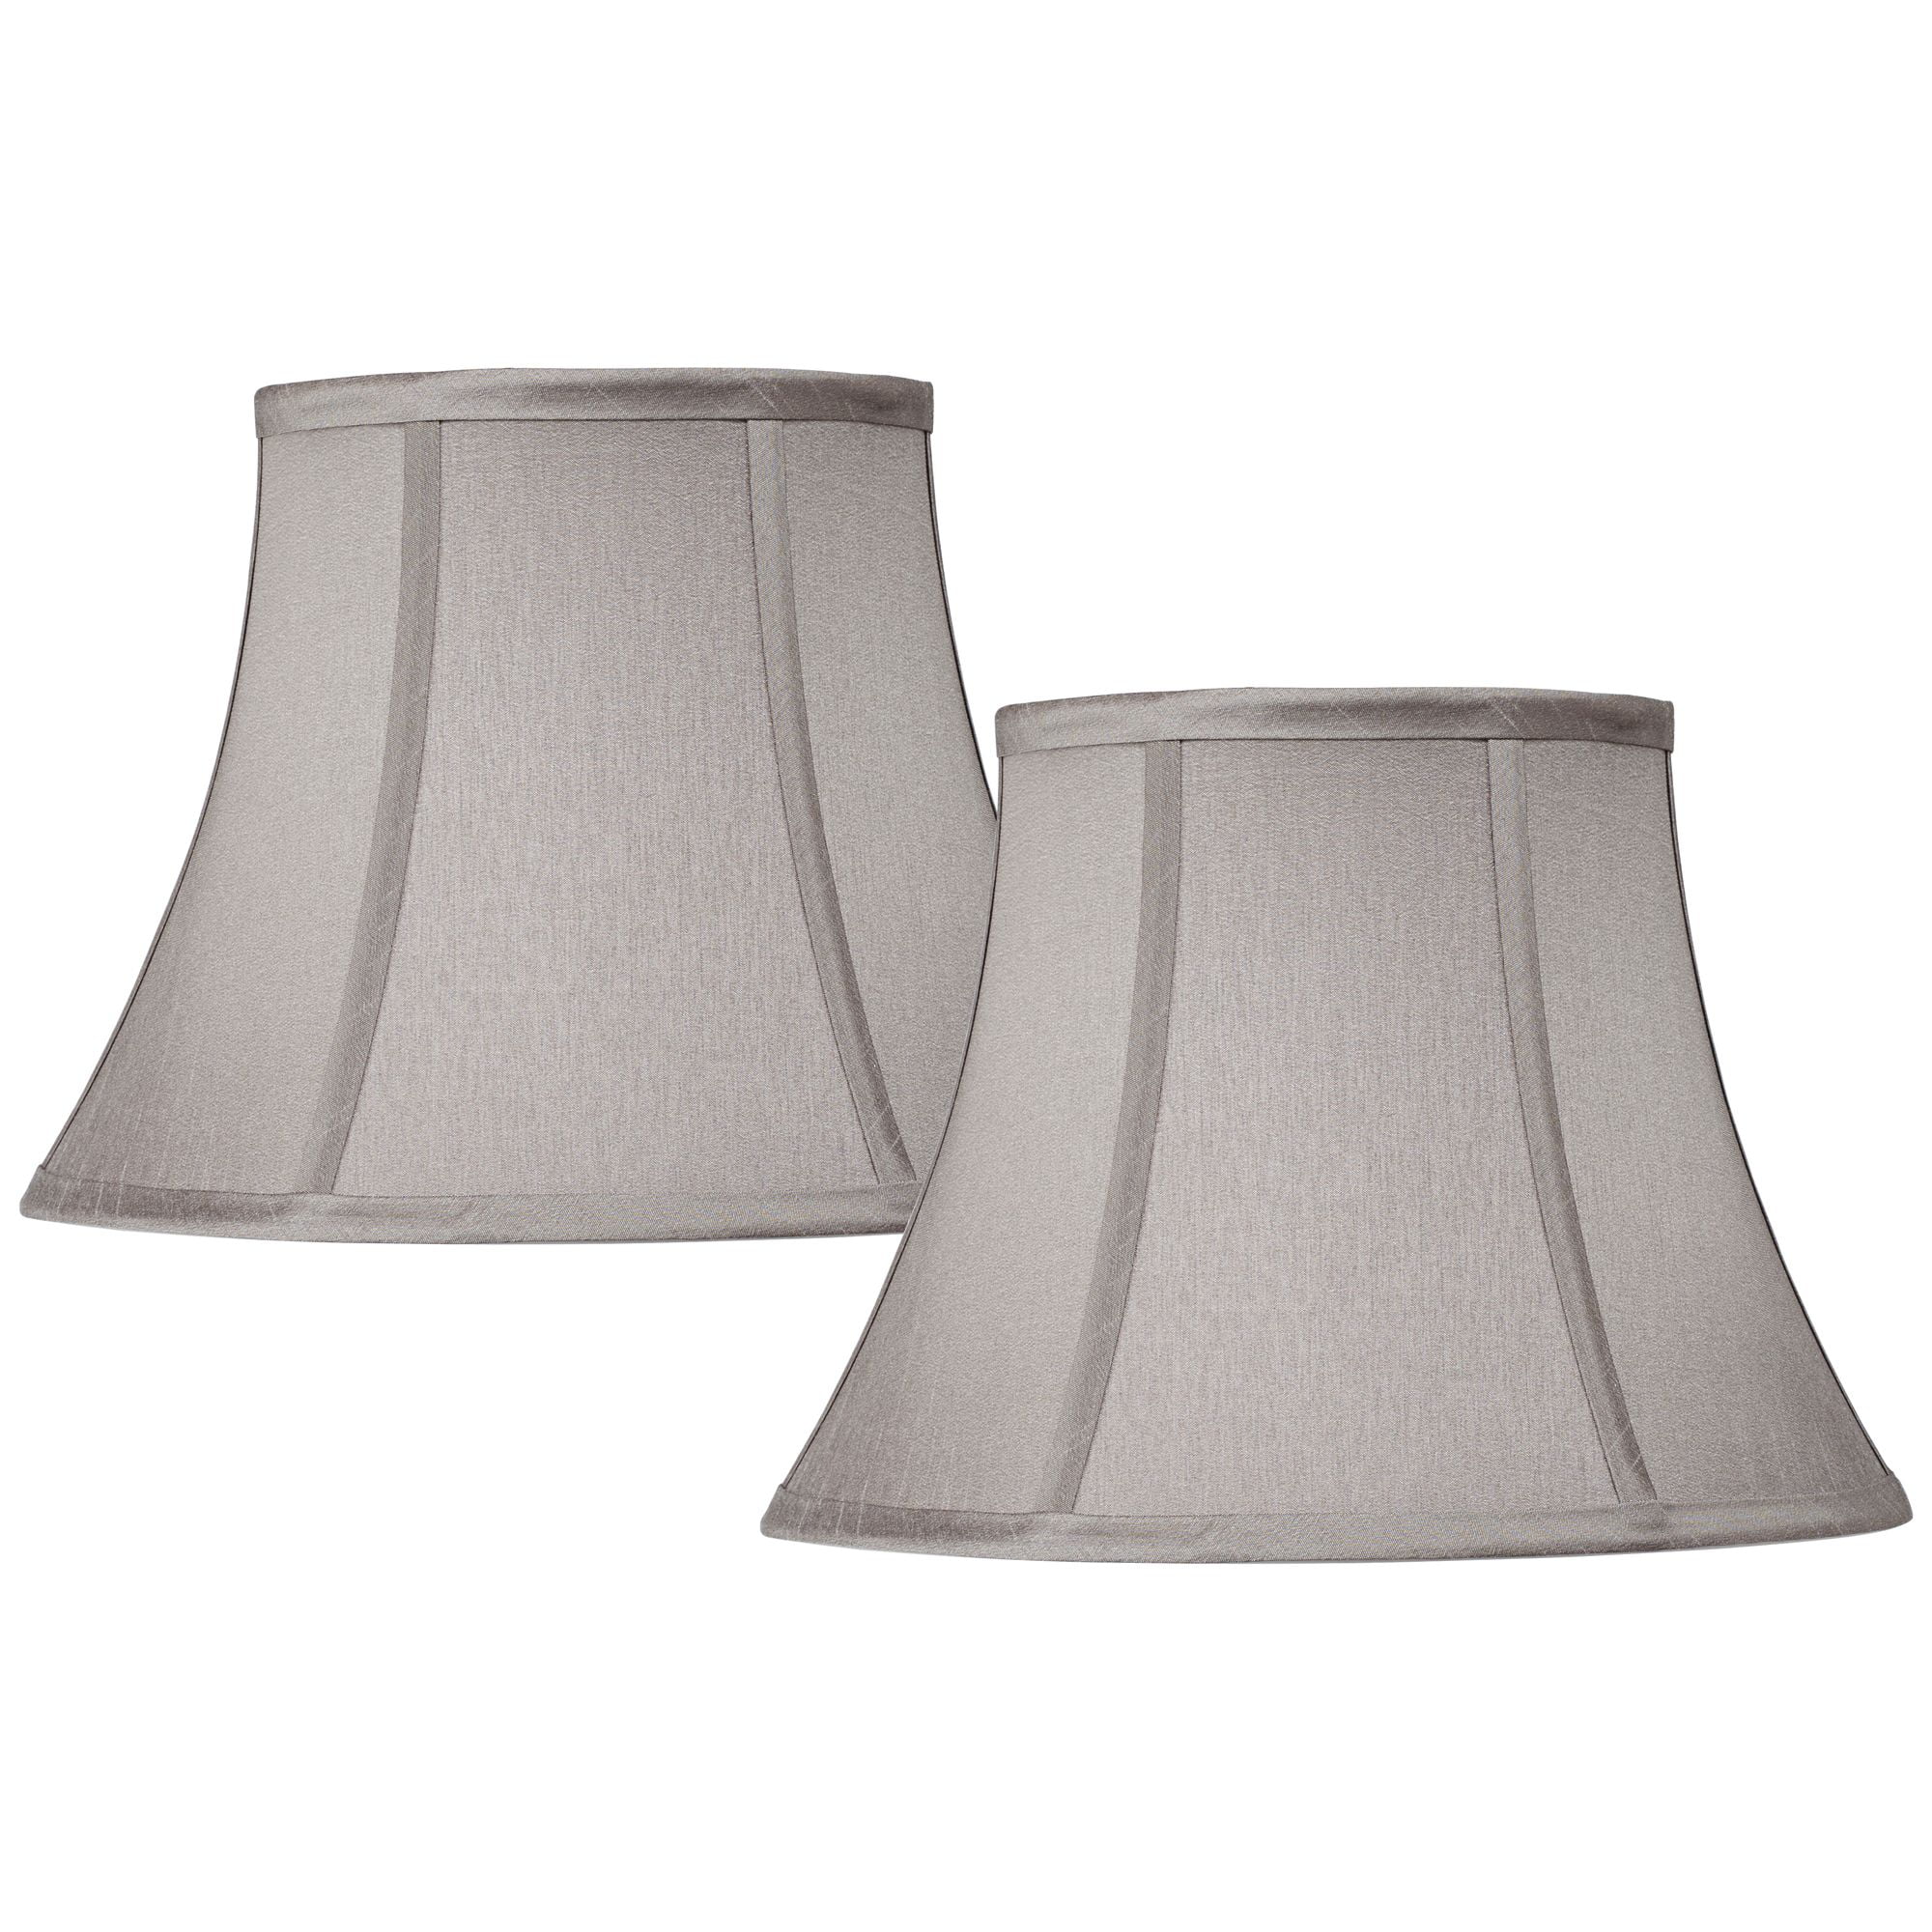 Details about   Lamp Shades Set of 2 Pewter Gray Small Bell 7" Top x 12" Bottom x 9" High 